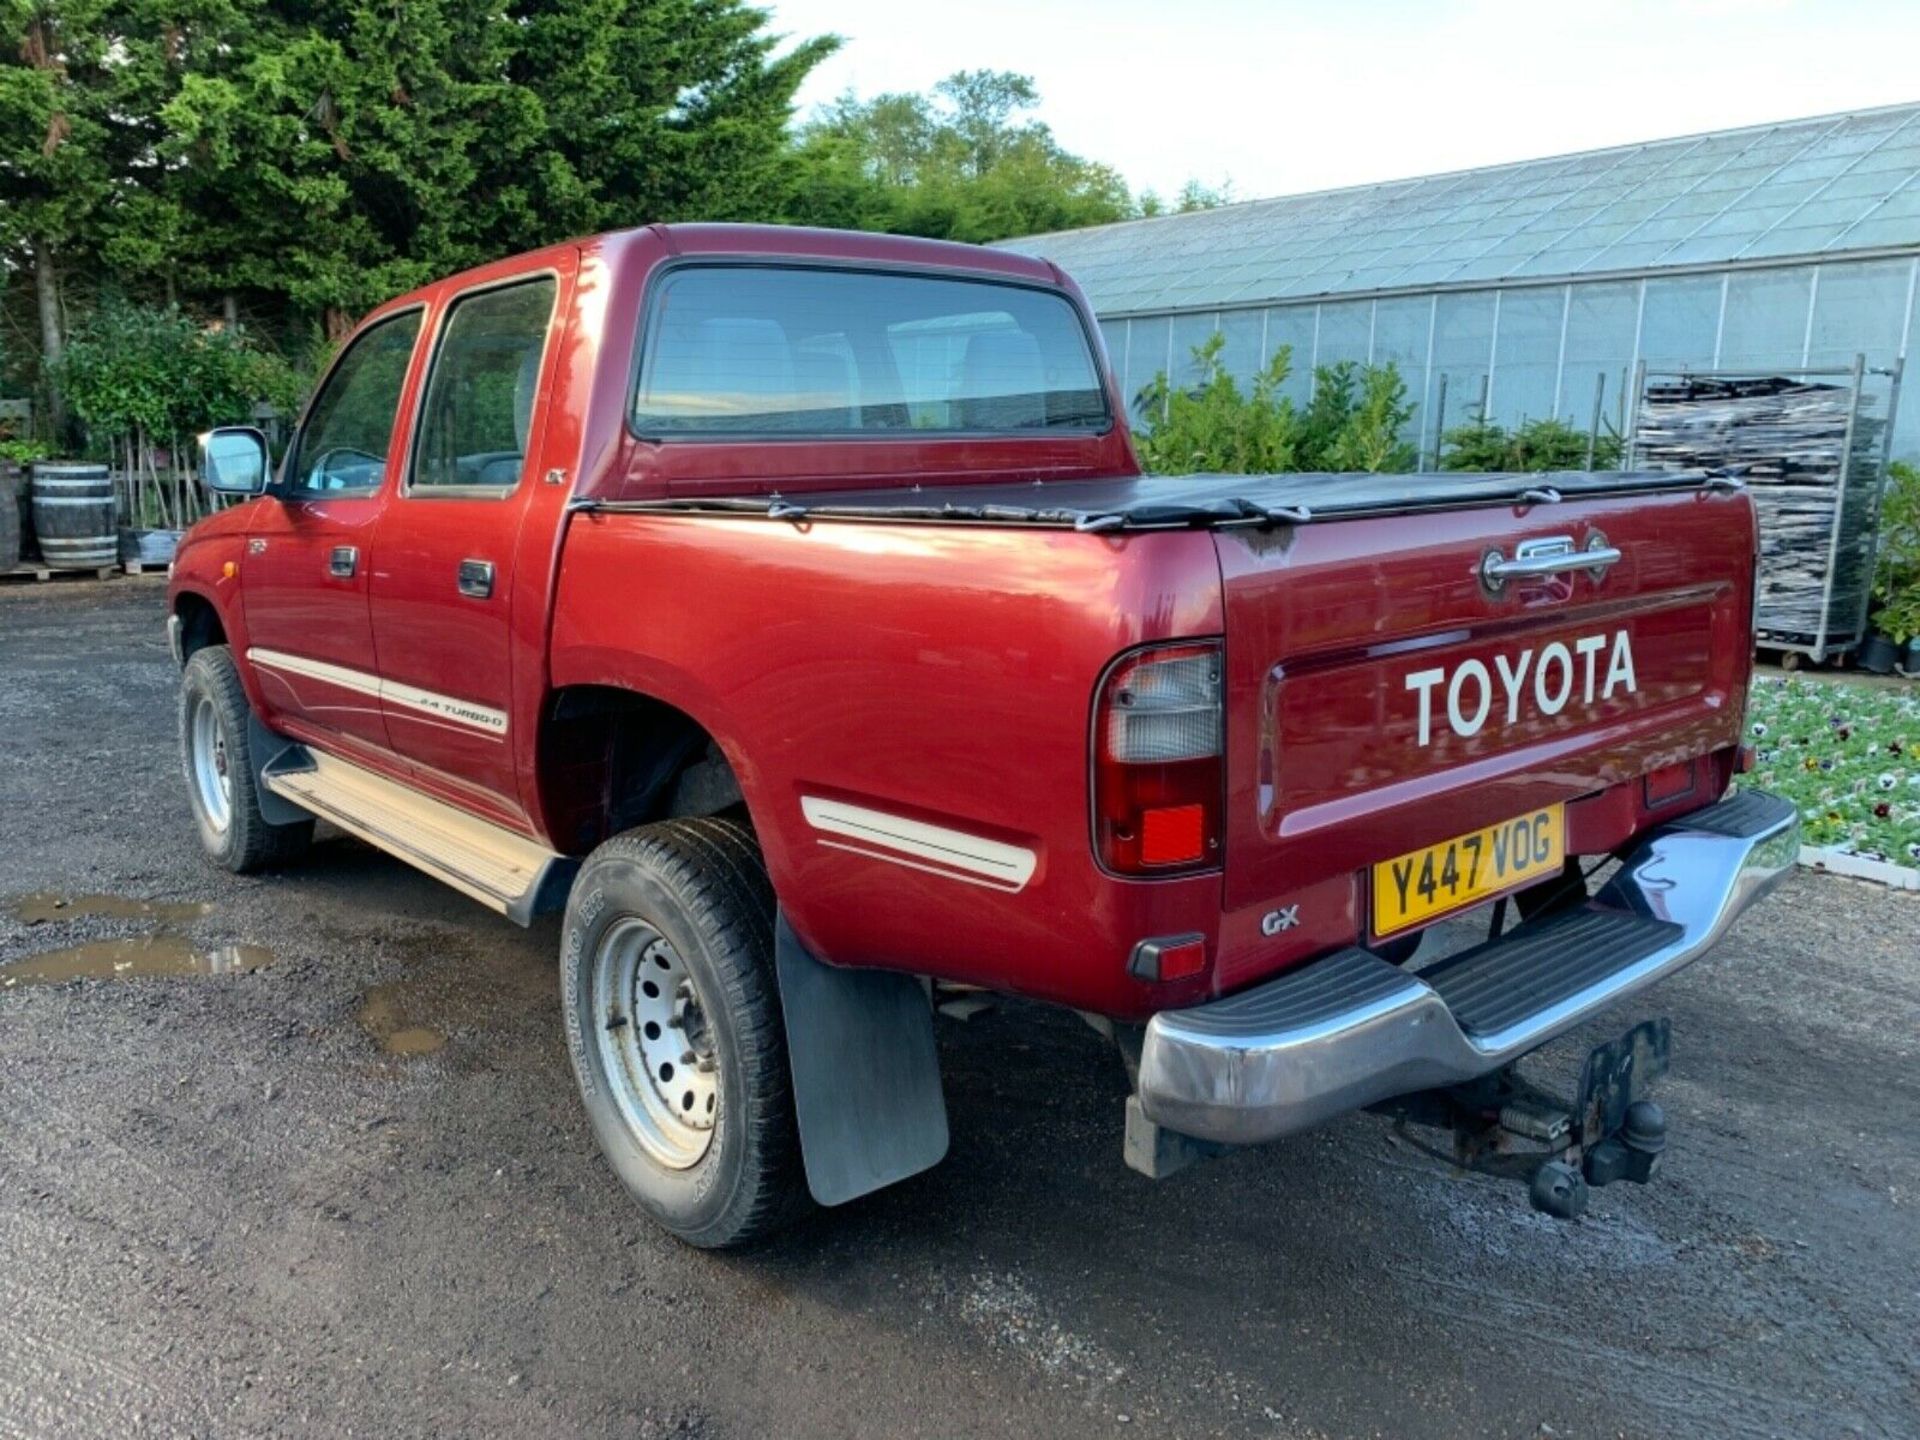 Toyota Hilux Pickup 4x4 - Image 5 of 12